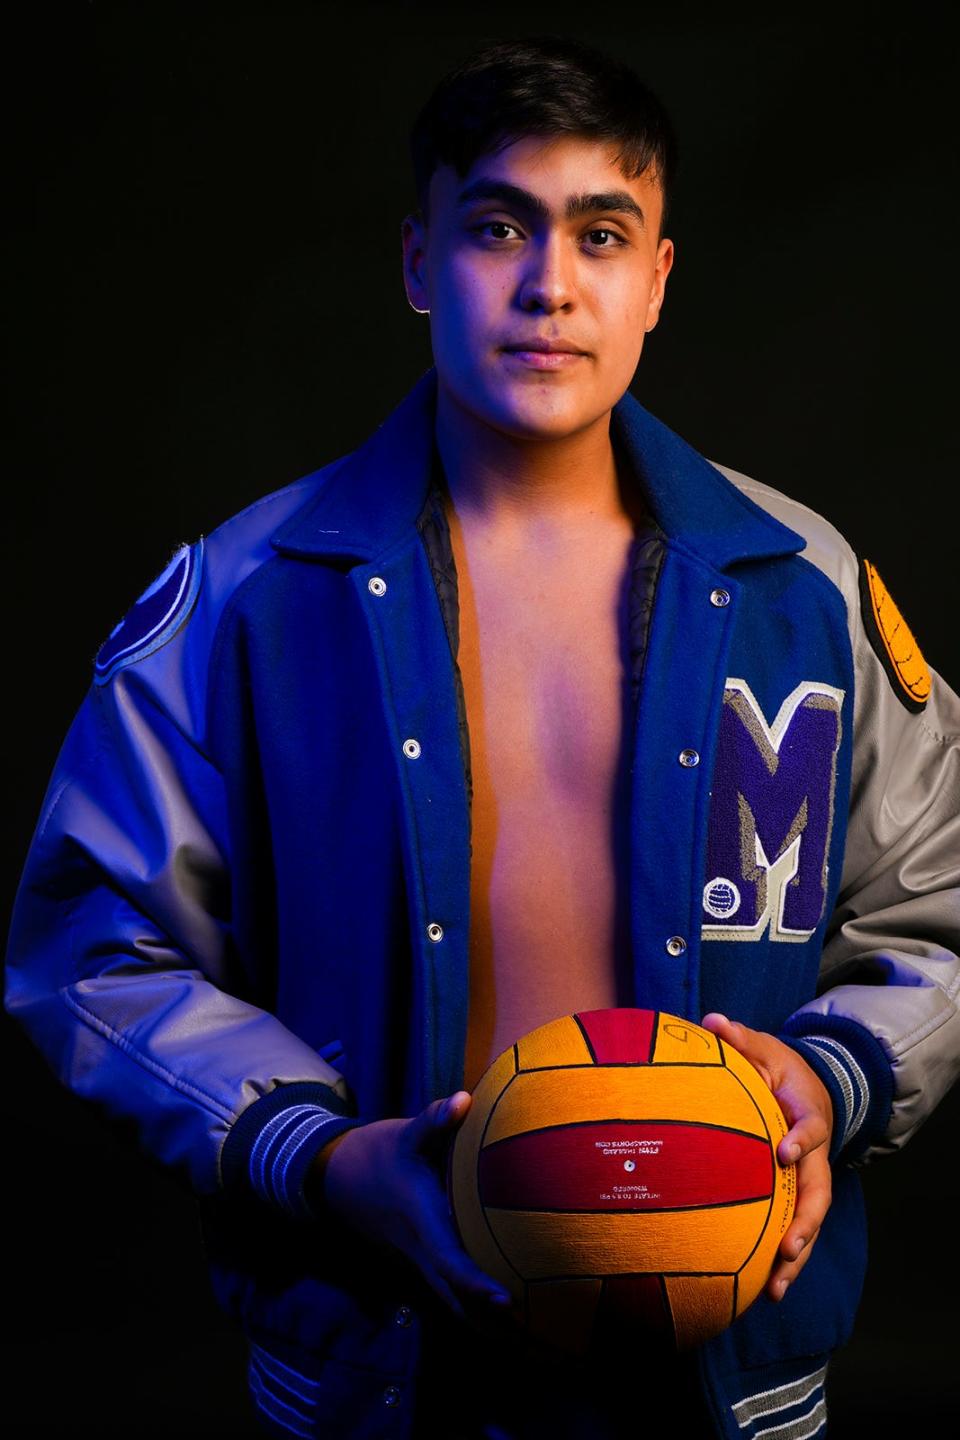 McCallum water polo player Andrew Wong has been swimming since elementary school but did not take up water polo until his sophomore year of high school. He said he enjoys the camaraderie part of playing in a team sport.